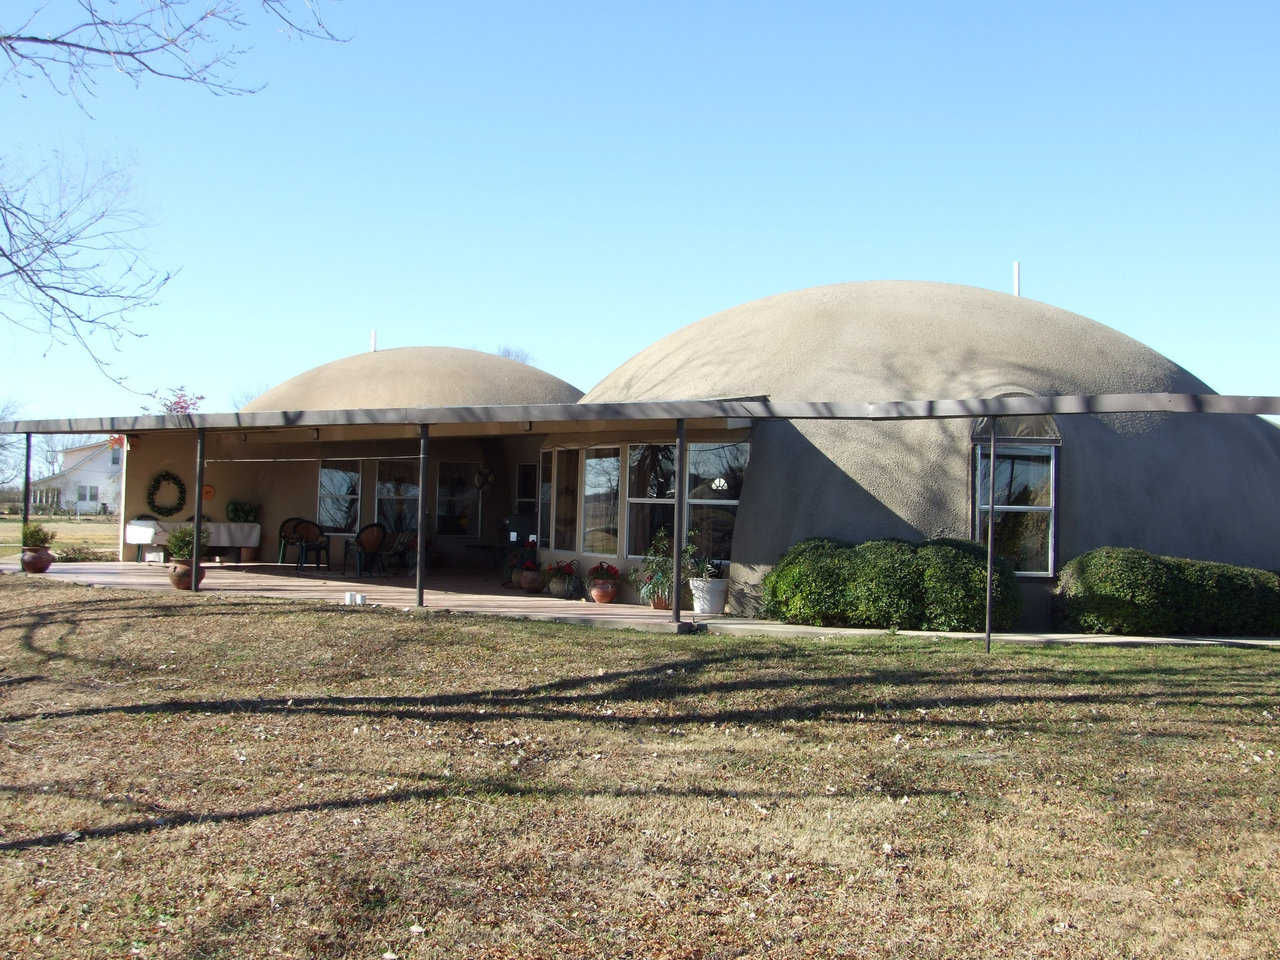 Charca Casa in Italy, Texas — Judy and David South’s home, Charca Casa, was designed and constructed as a duplex of two connected domes, each with a diameter of 40 feet. Since its construction in 1994, Charca Casa has beautifully survived several horrific, typically Texas wind storms and twisters.